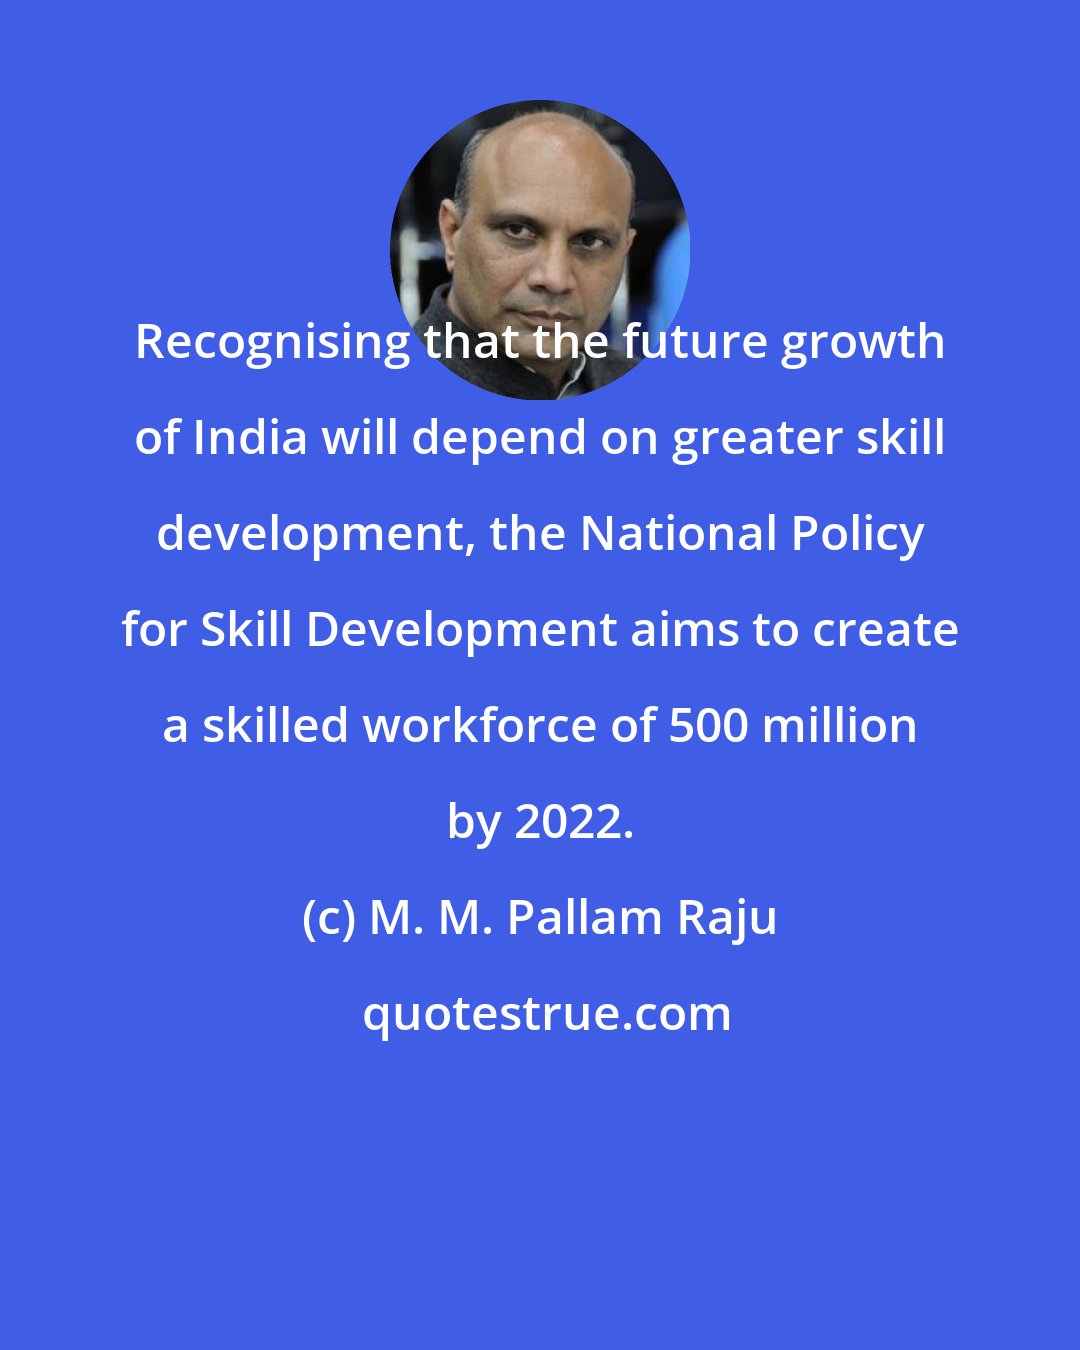 M. M. Pallam Raju: Recognising that the future growth of India will depend on greater skill development, the National Policy for Skill Development aims to create a skilled workforce of 500 million by 2022.